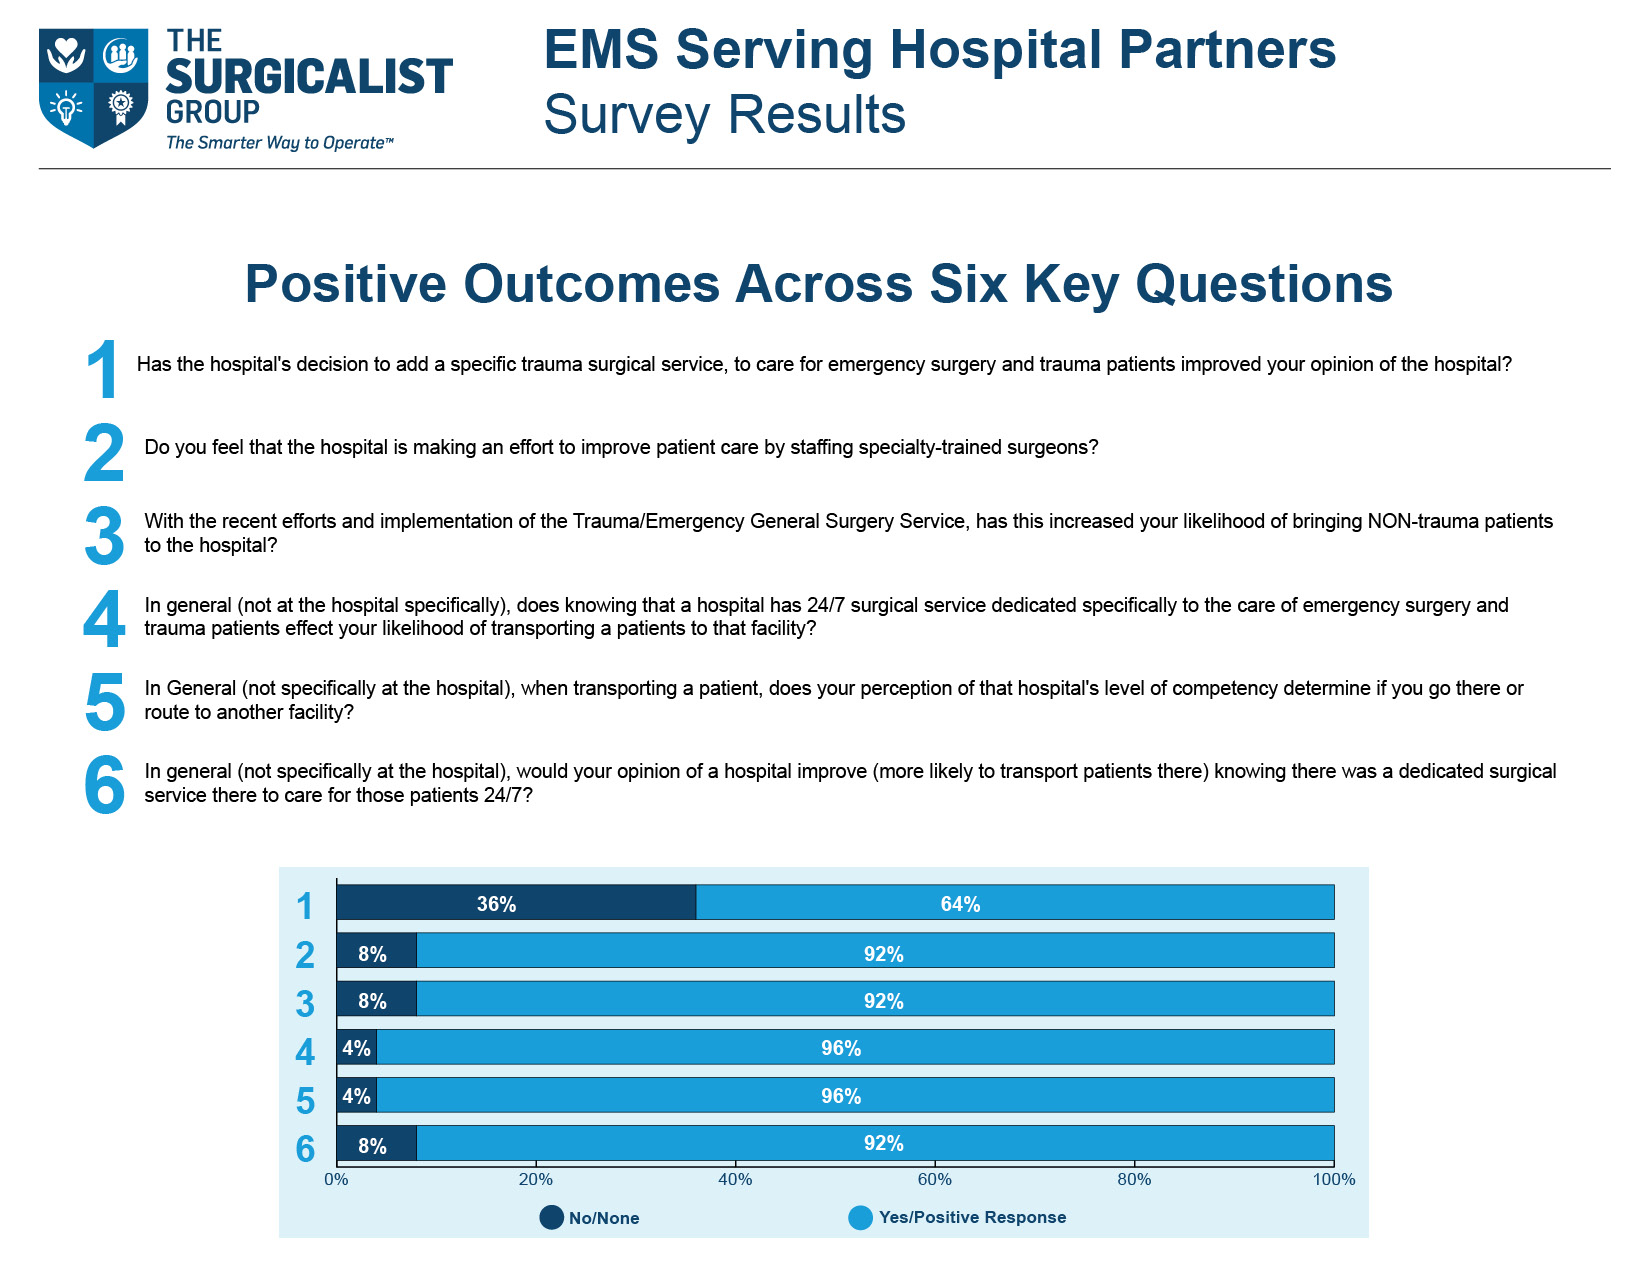 EMS Prefer Hospitals with The Surgicalist Group - The Surgicalist